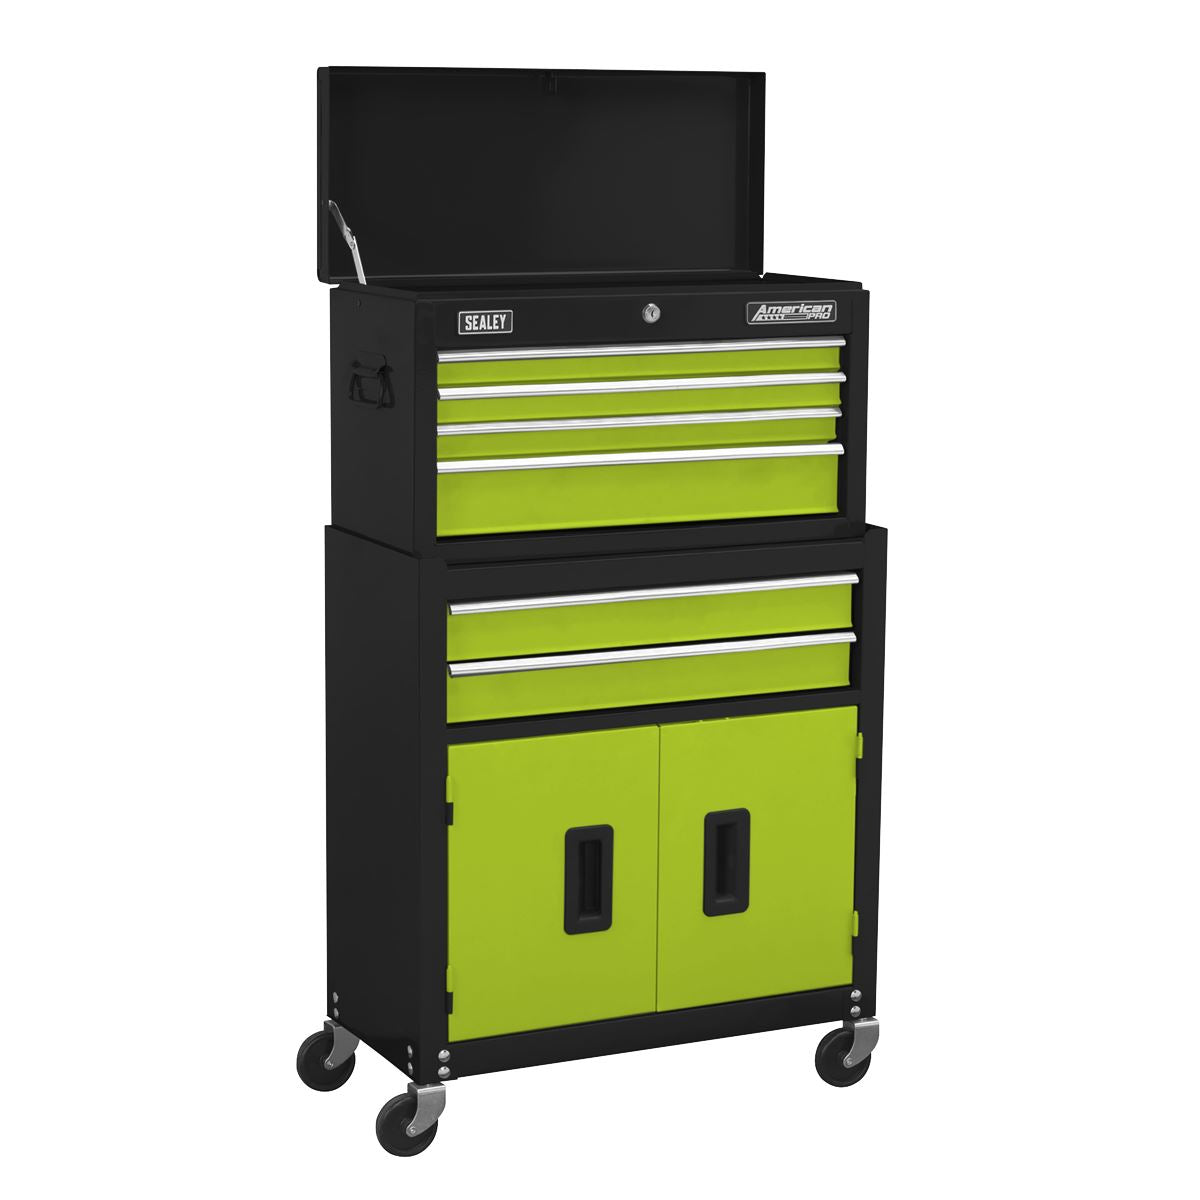 Sealey American Pro Topchest & Rollcab Combination 6 Drawer with Ball-Bearing Slides - Green